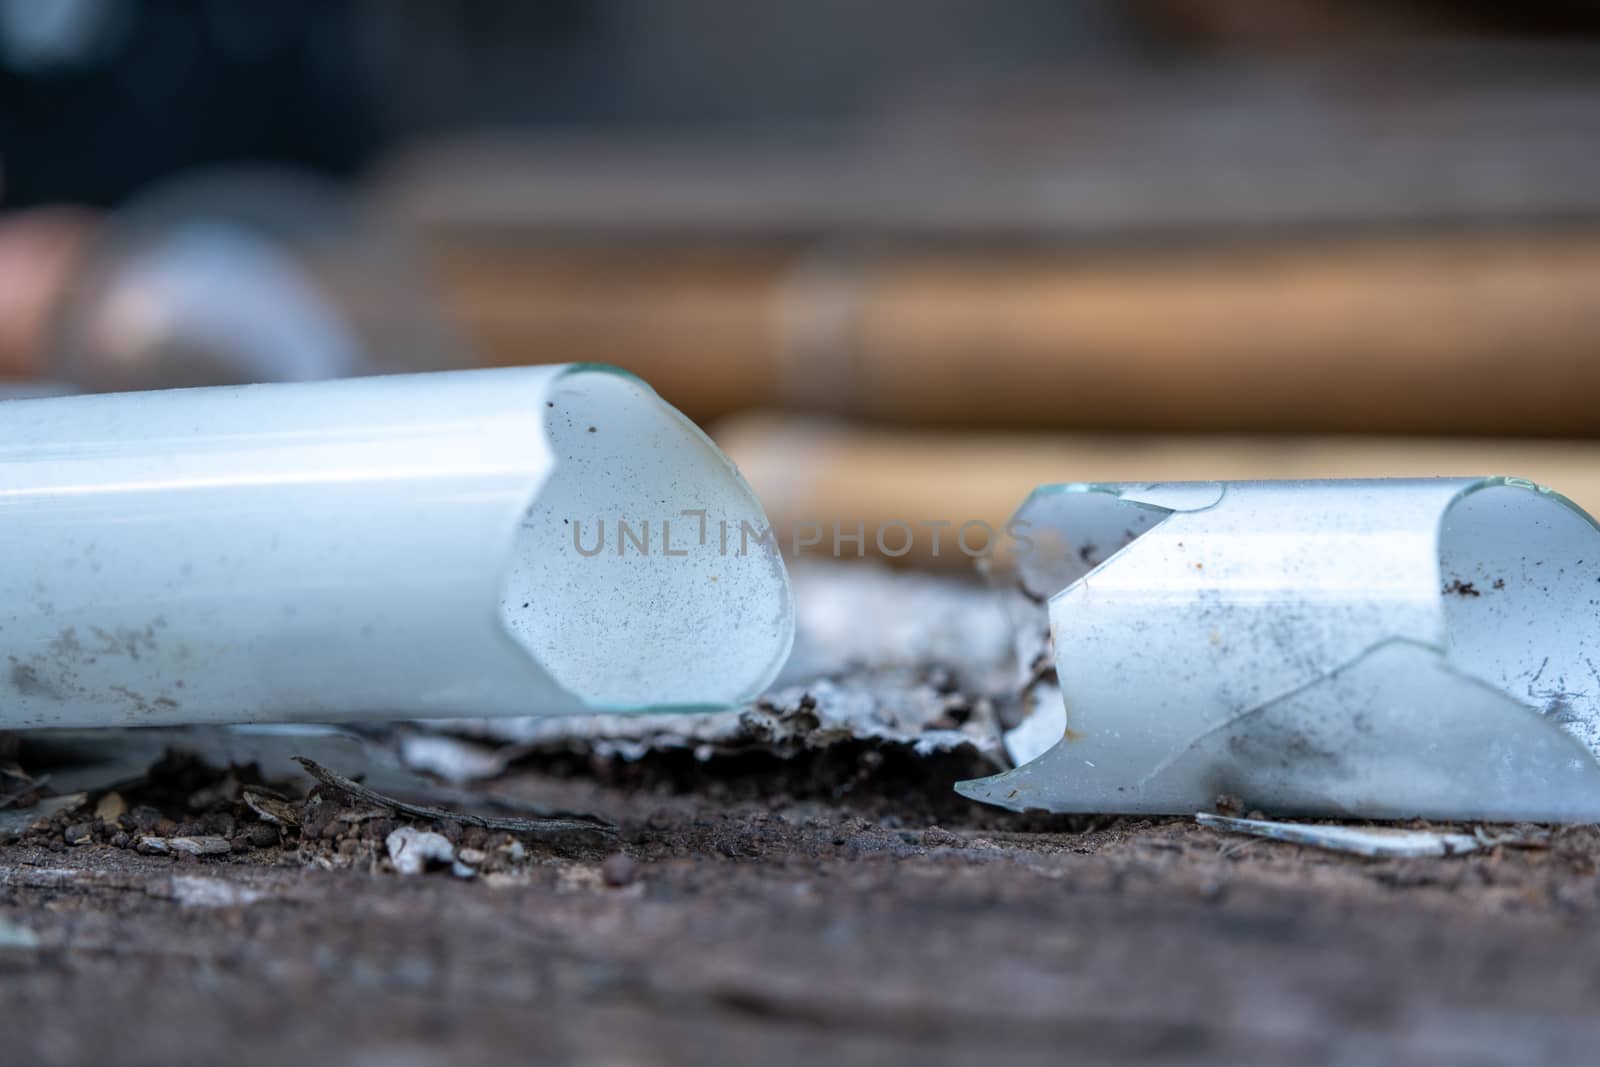 Shattered glass tube, broken energy saving bulb, compact fluorescent lamp tubular type with blur background by peerapixs